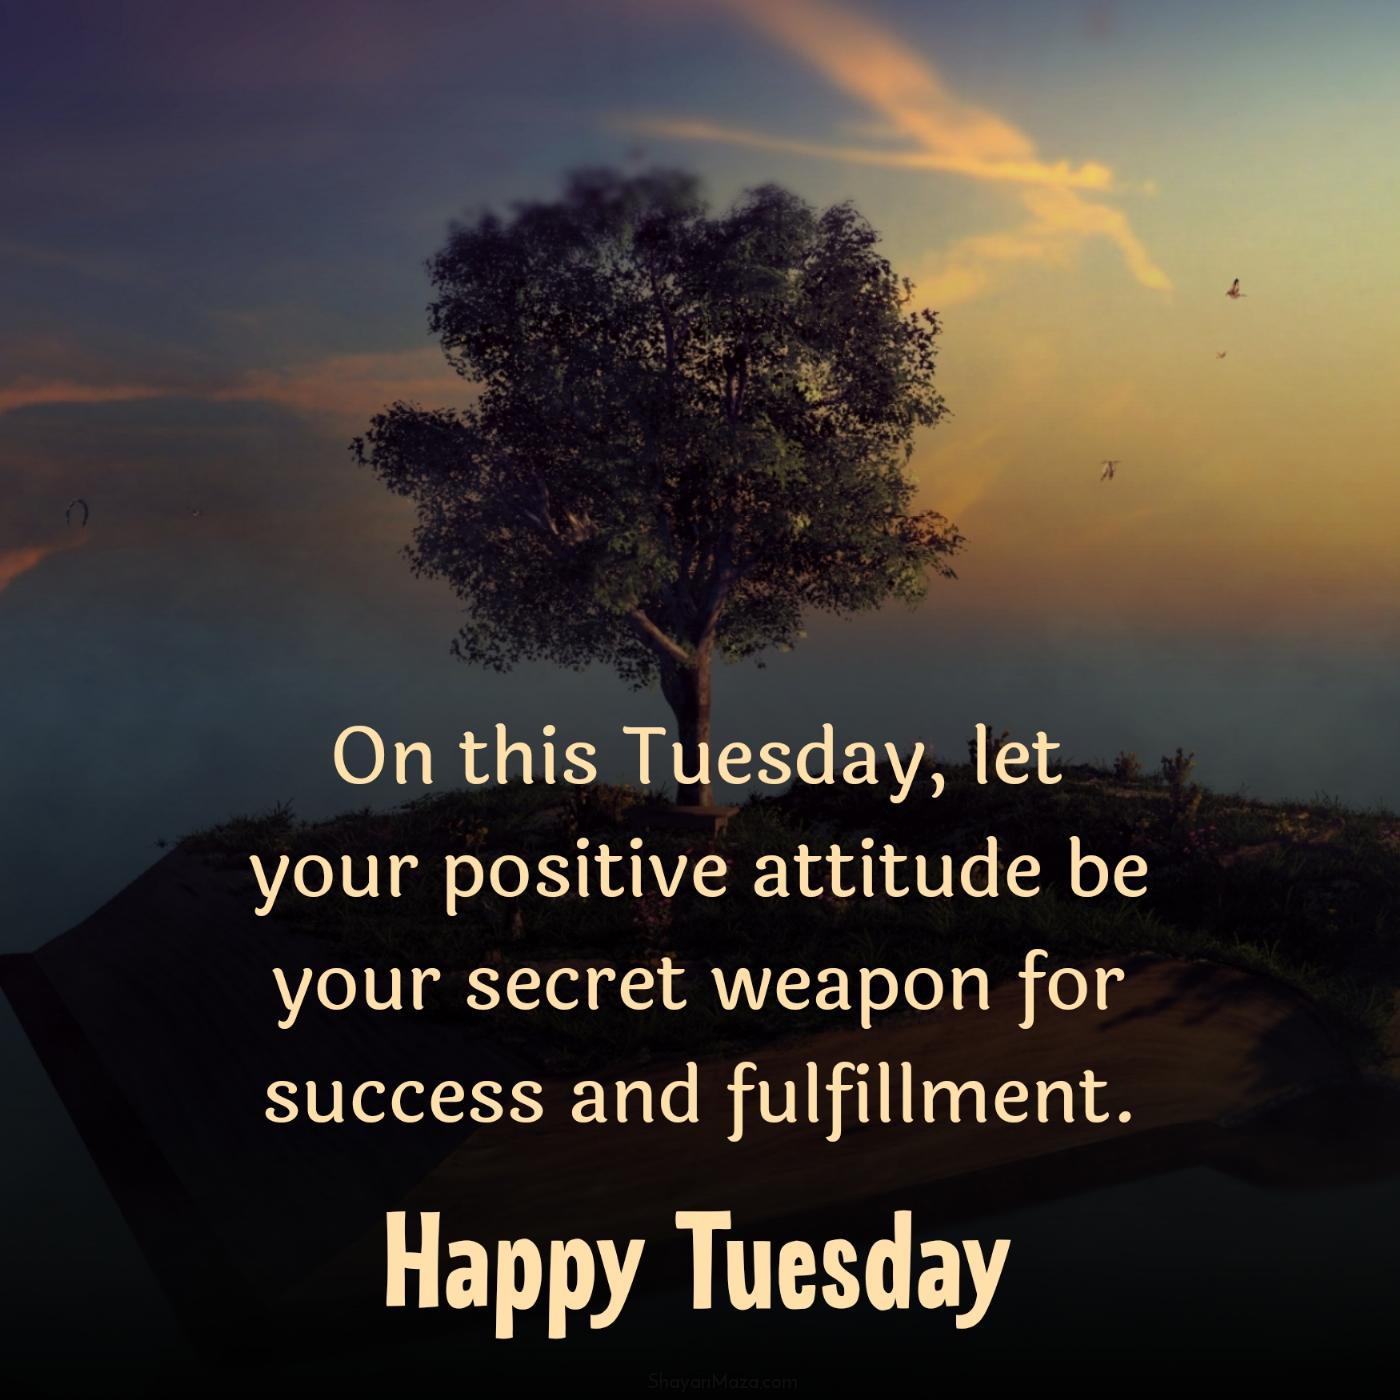 On this Tuesday let your positive attitude be your secret weapon